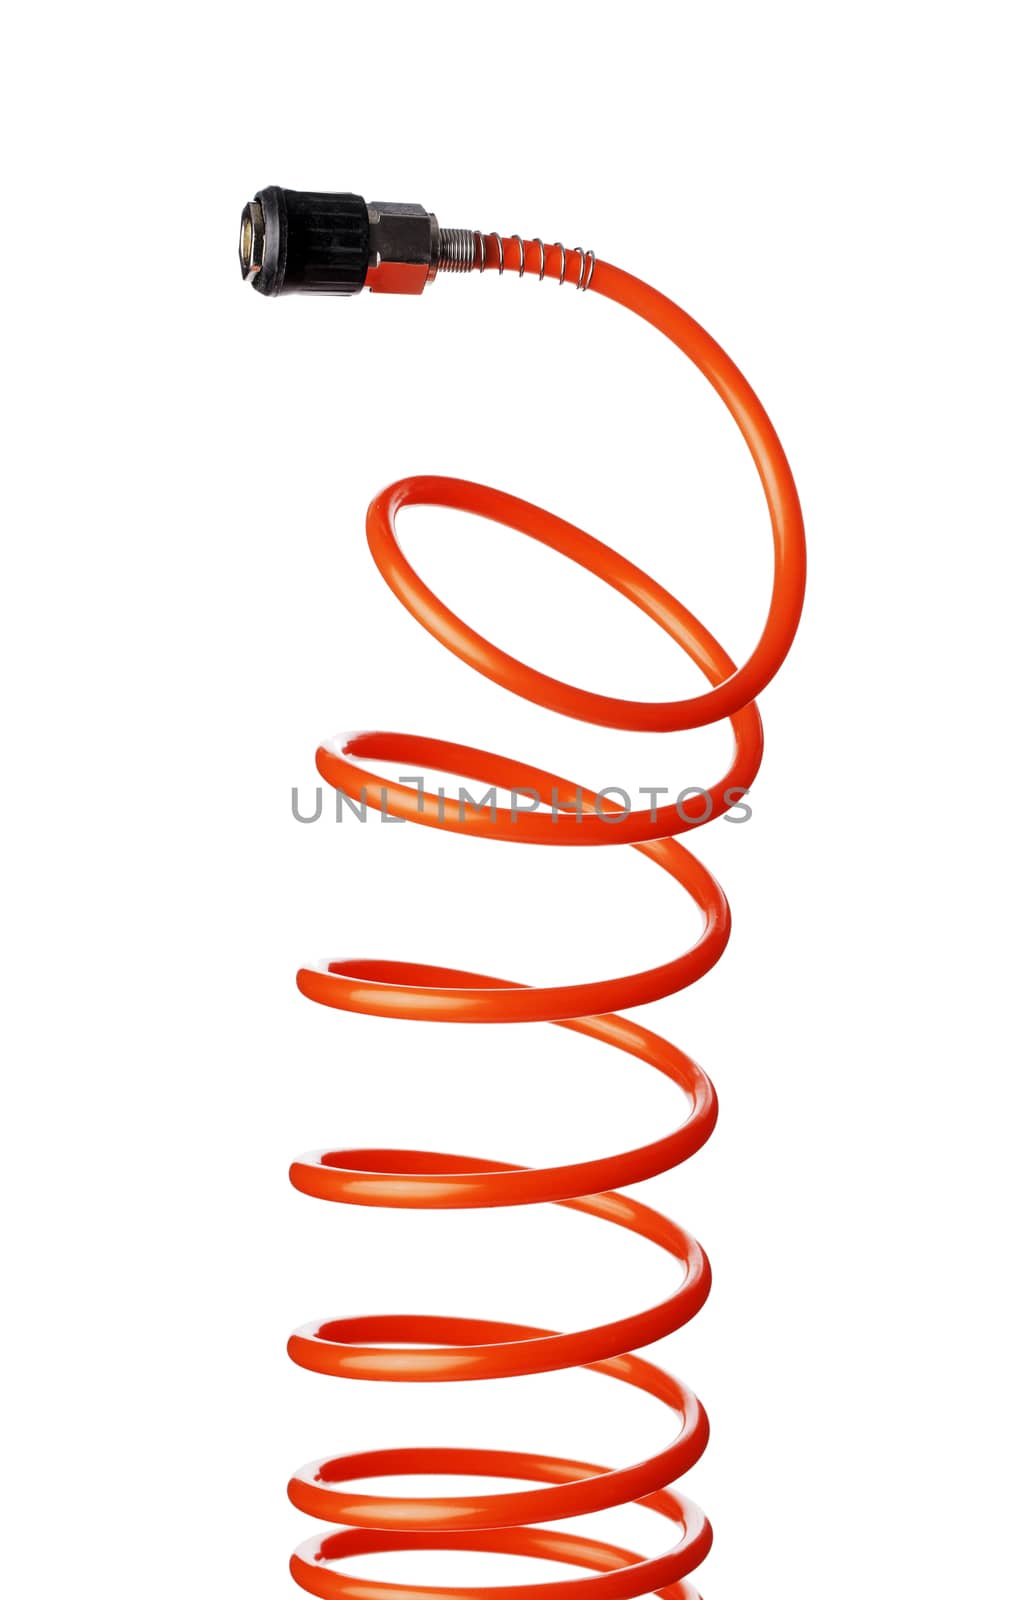 Orange red thin spiral air hose used for pneumatic tools. 